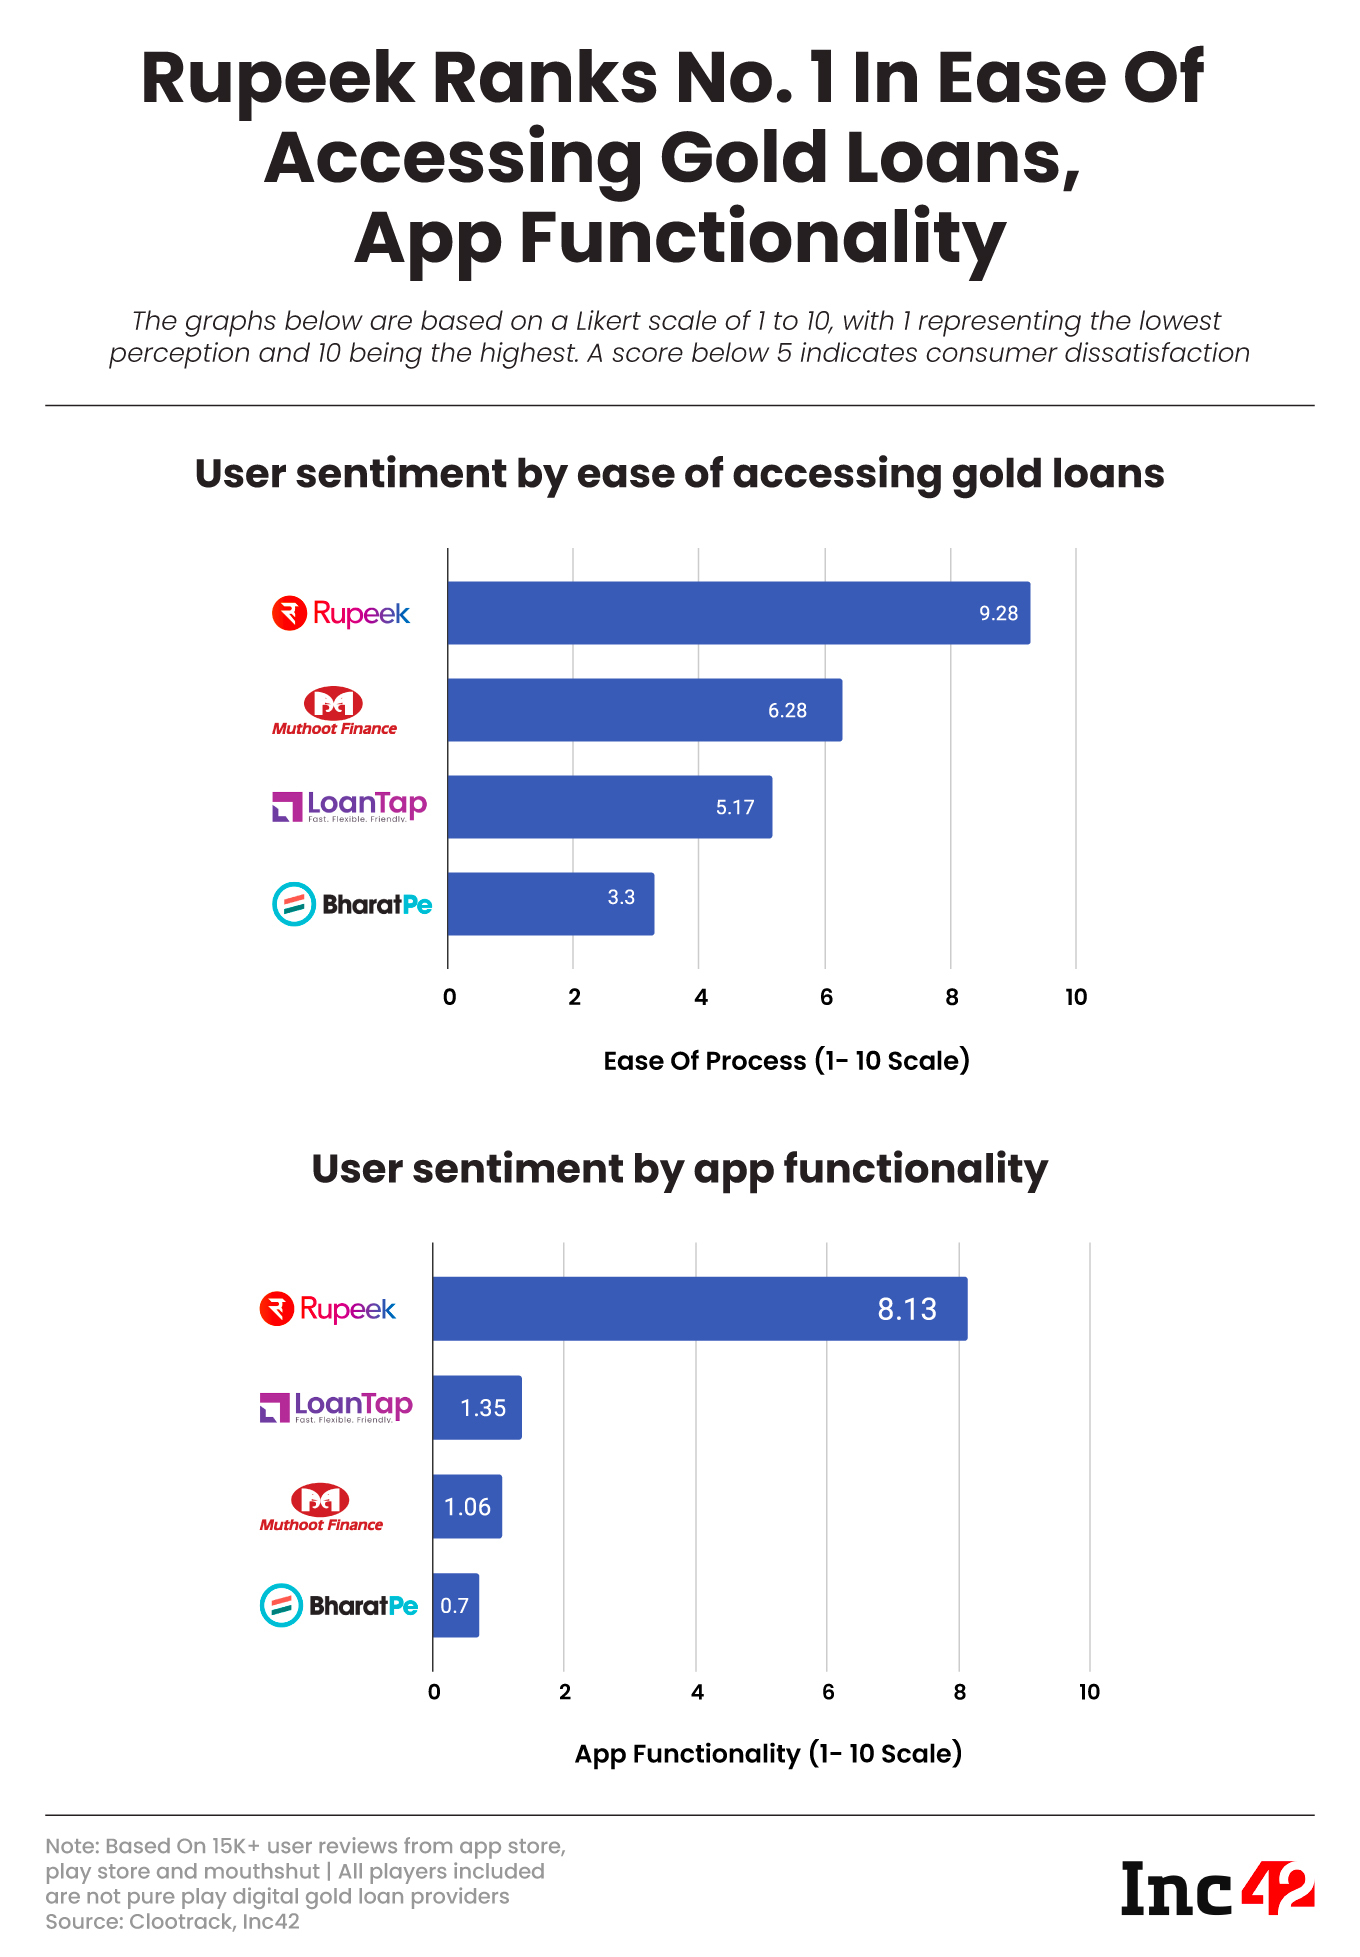 Rupeek Ranks No. 1 In Ease Of Accessing Gold Loans, App Functionality